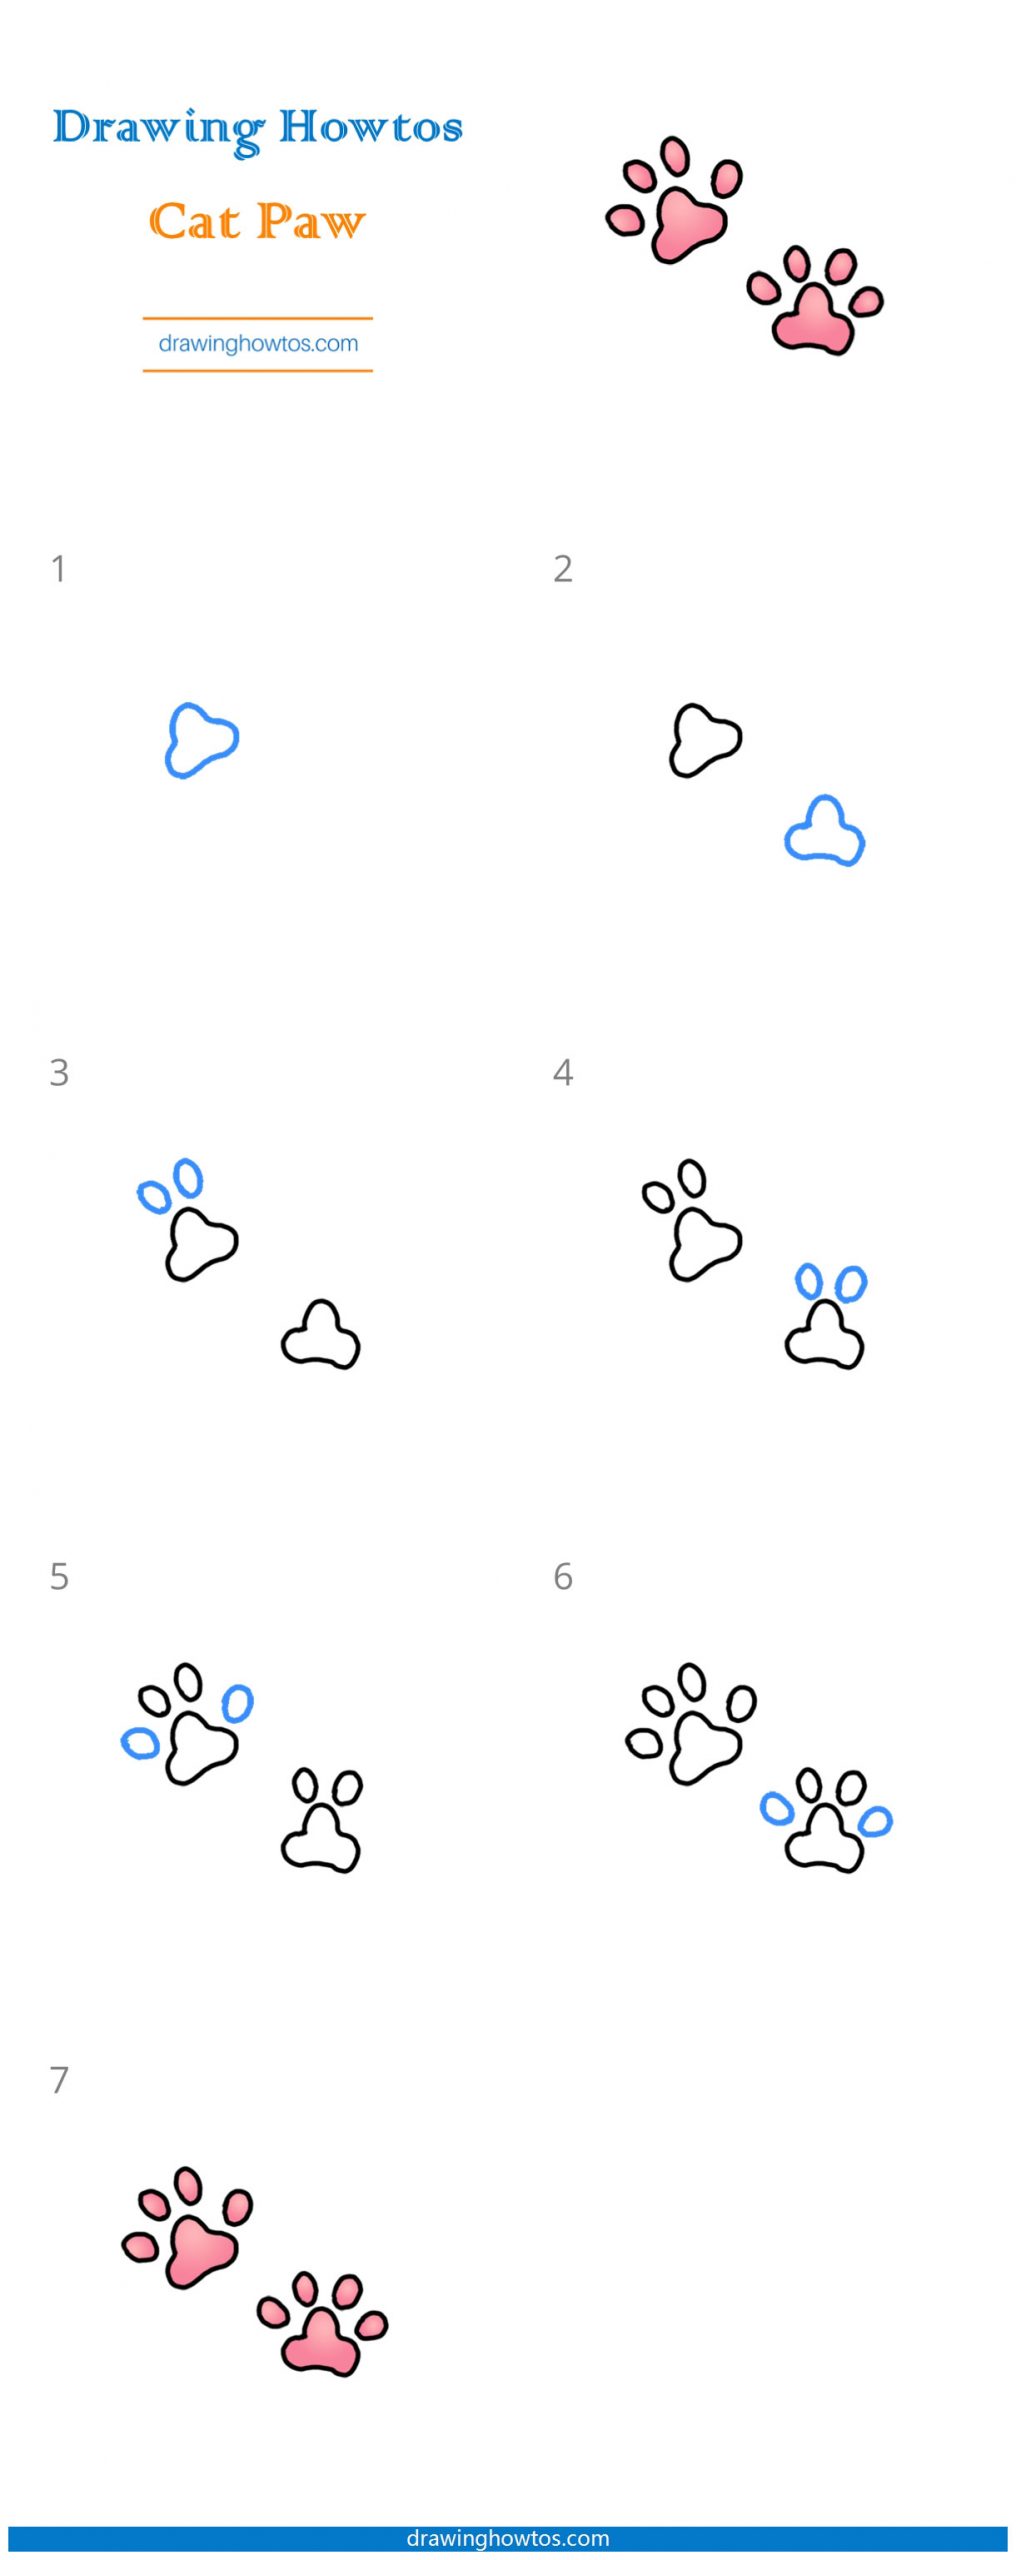 How to Draw Cat Paws Step by Step